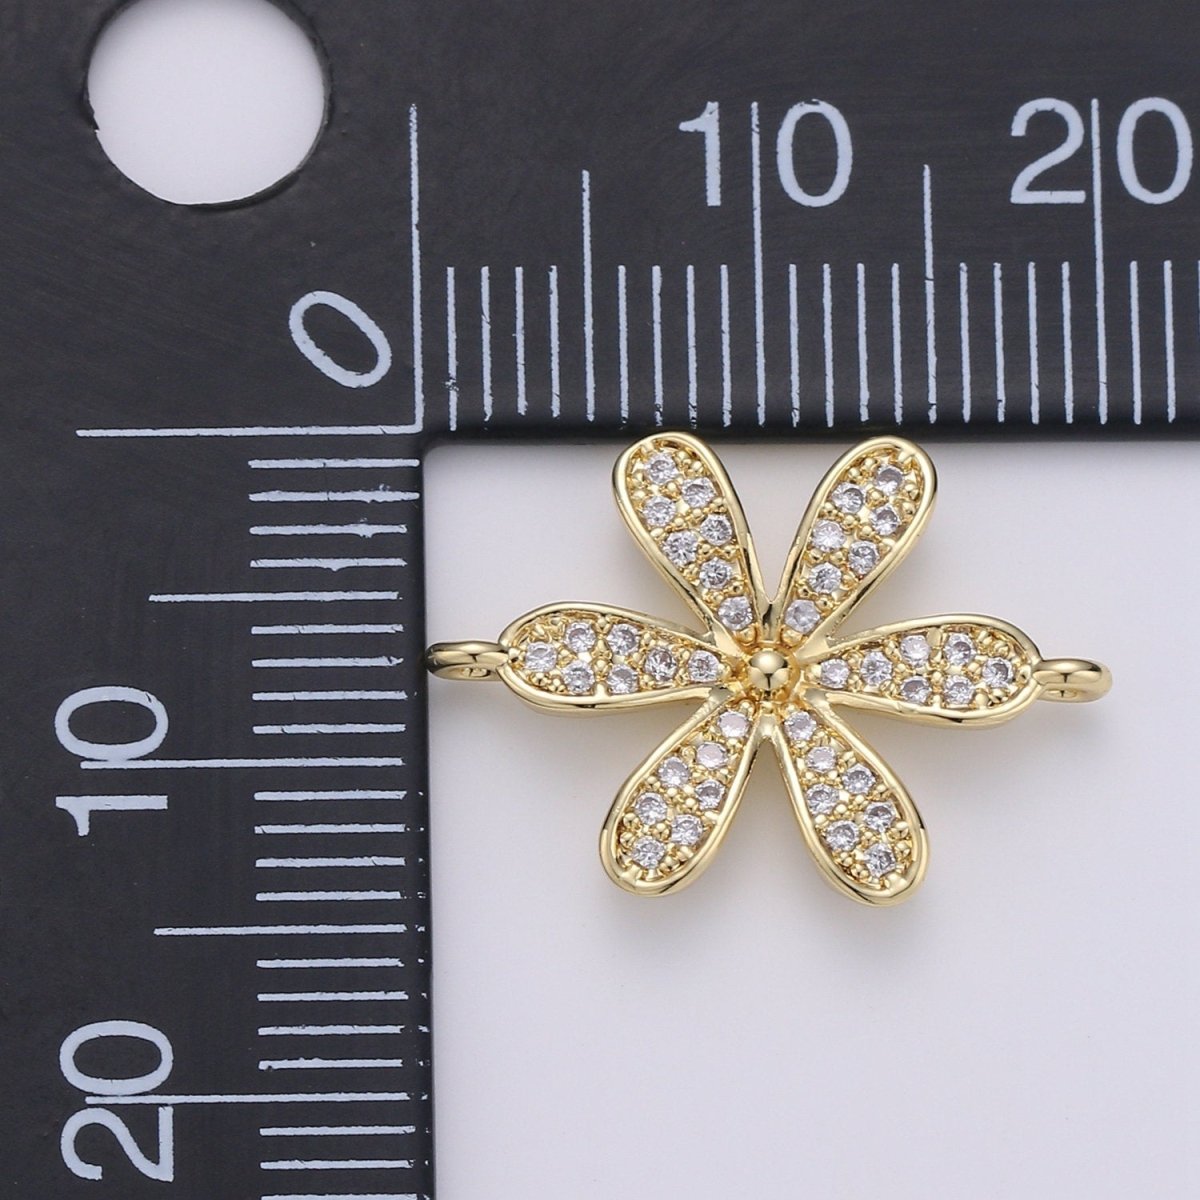 14K Gold Filled CZ paved Connectors, Floral Charm Cubic Micro paved, Petal Jewelry Craft Supply, Spring, Jasmine, Nature Lover Gift F-503 - DLUXCA